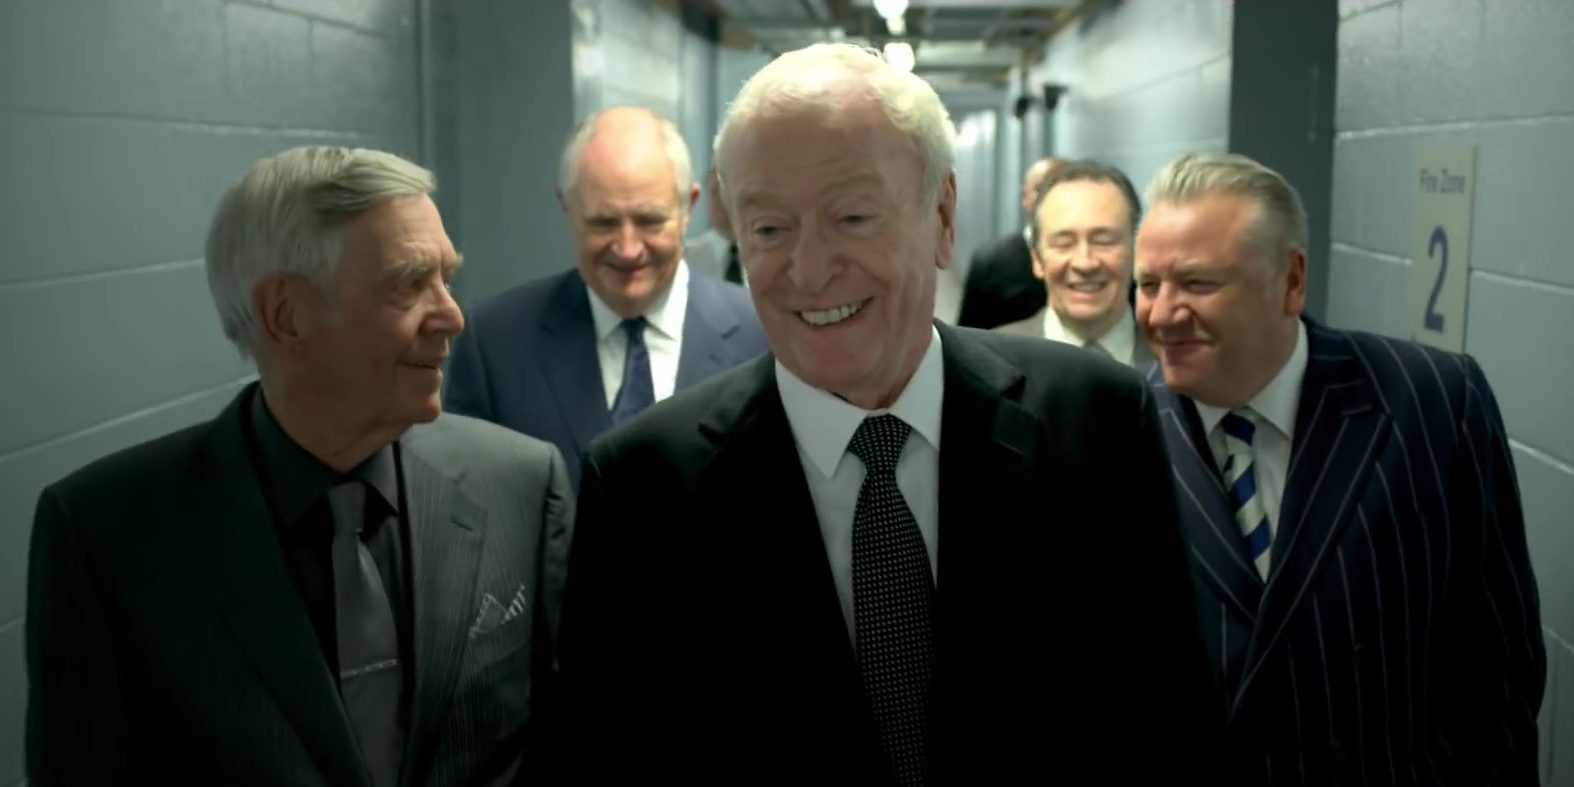 Is King of Thieves Based on a True Story?